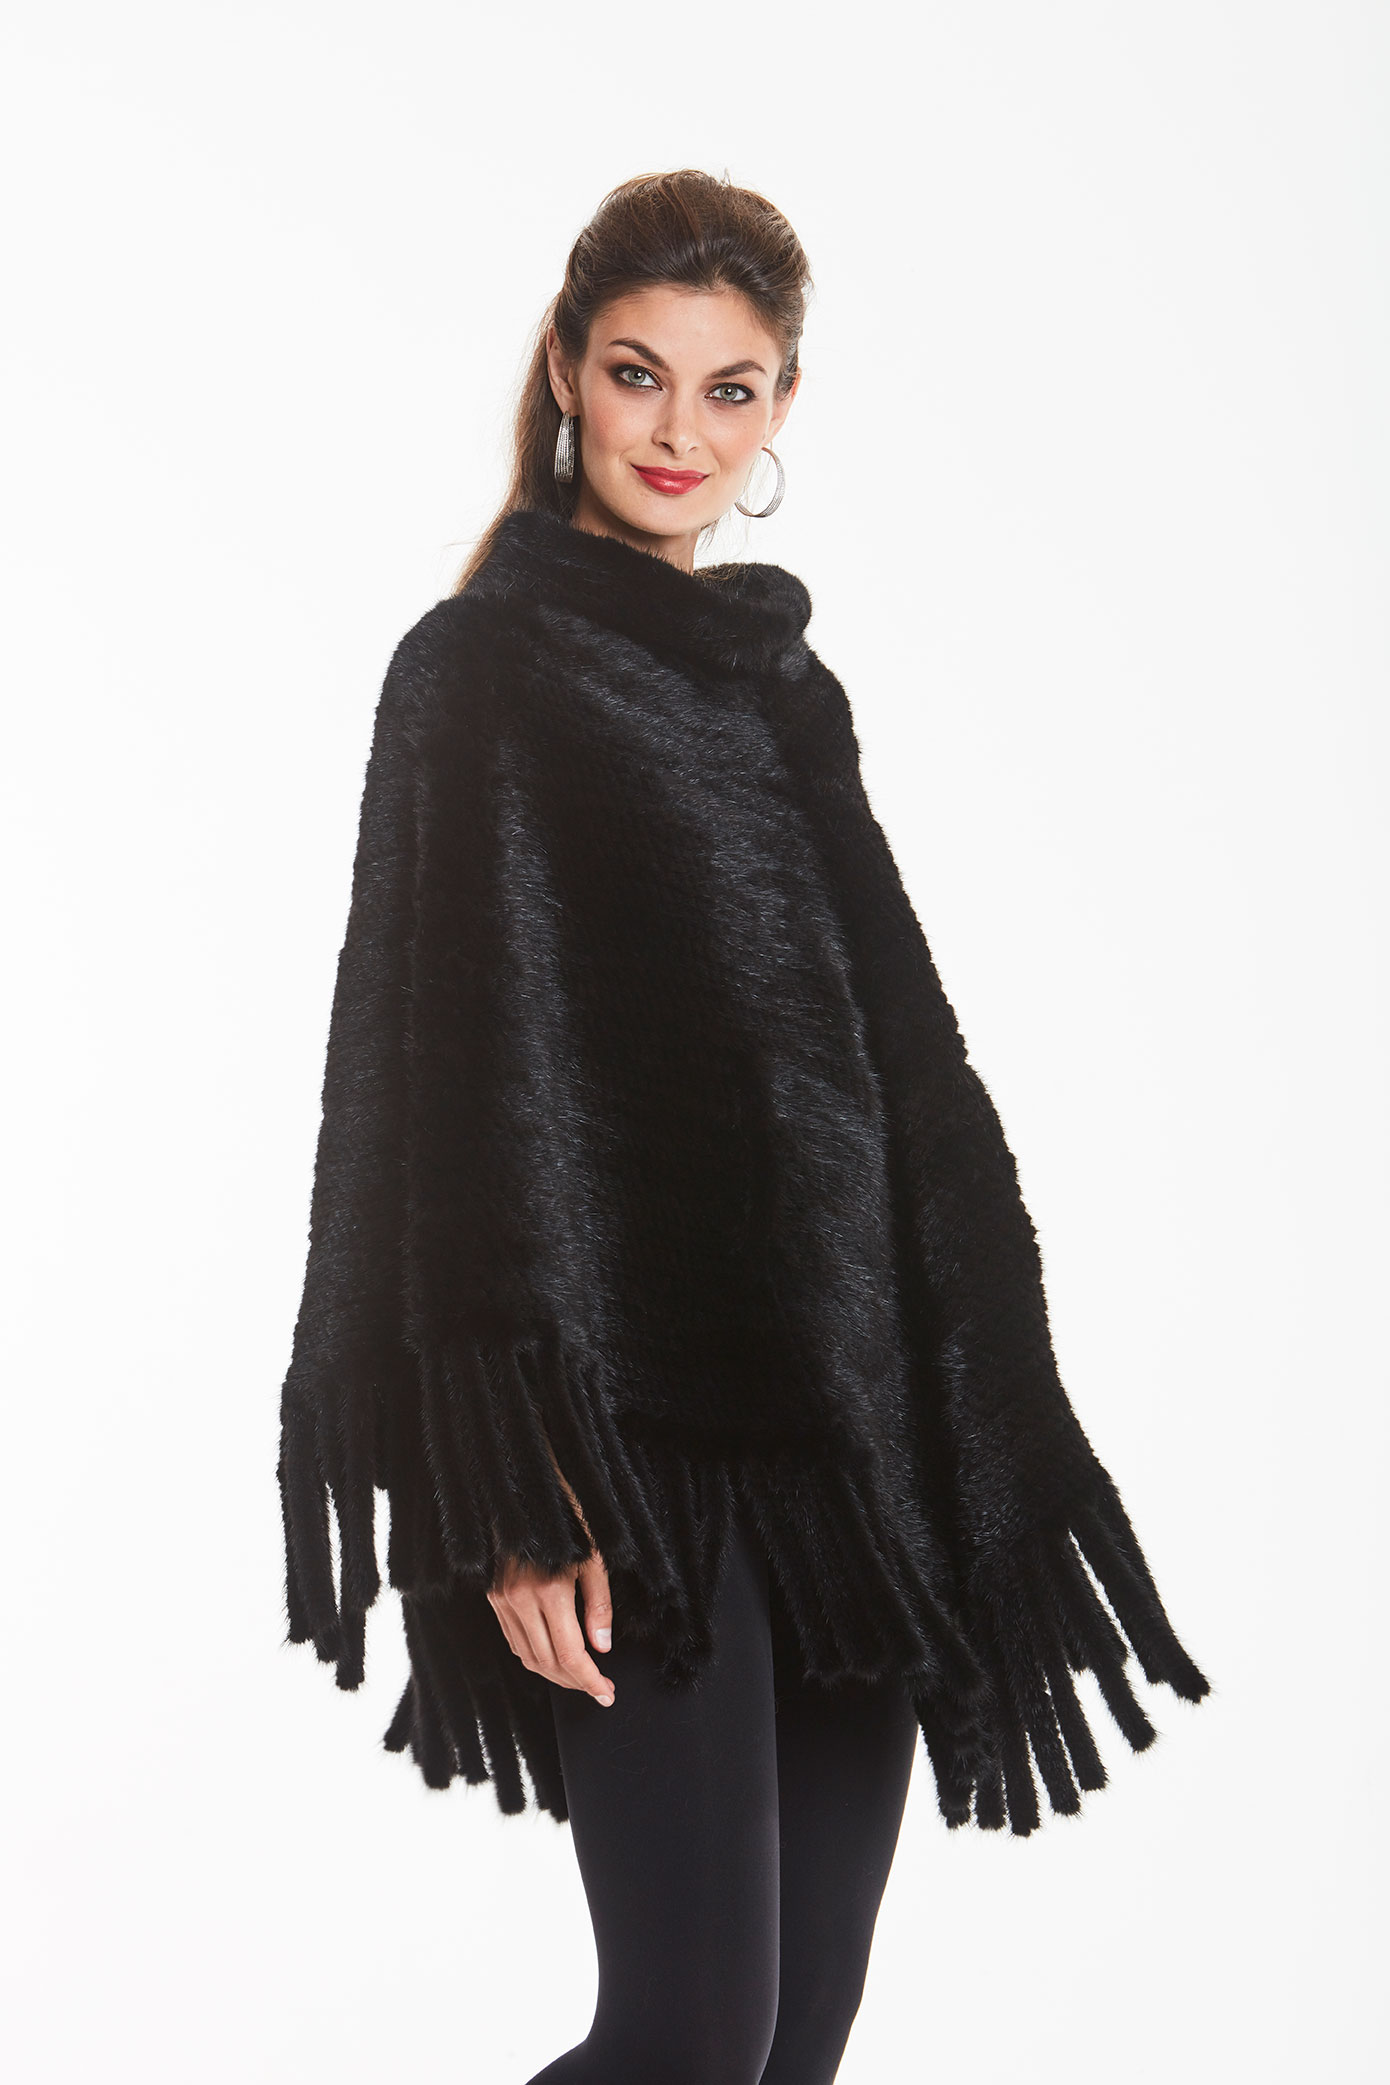 Knitted Mink Poncho Cape – Madison Avenue Mall Furs